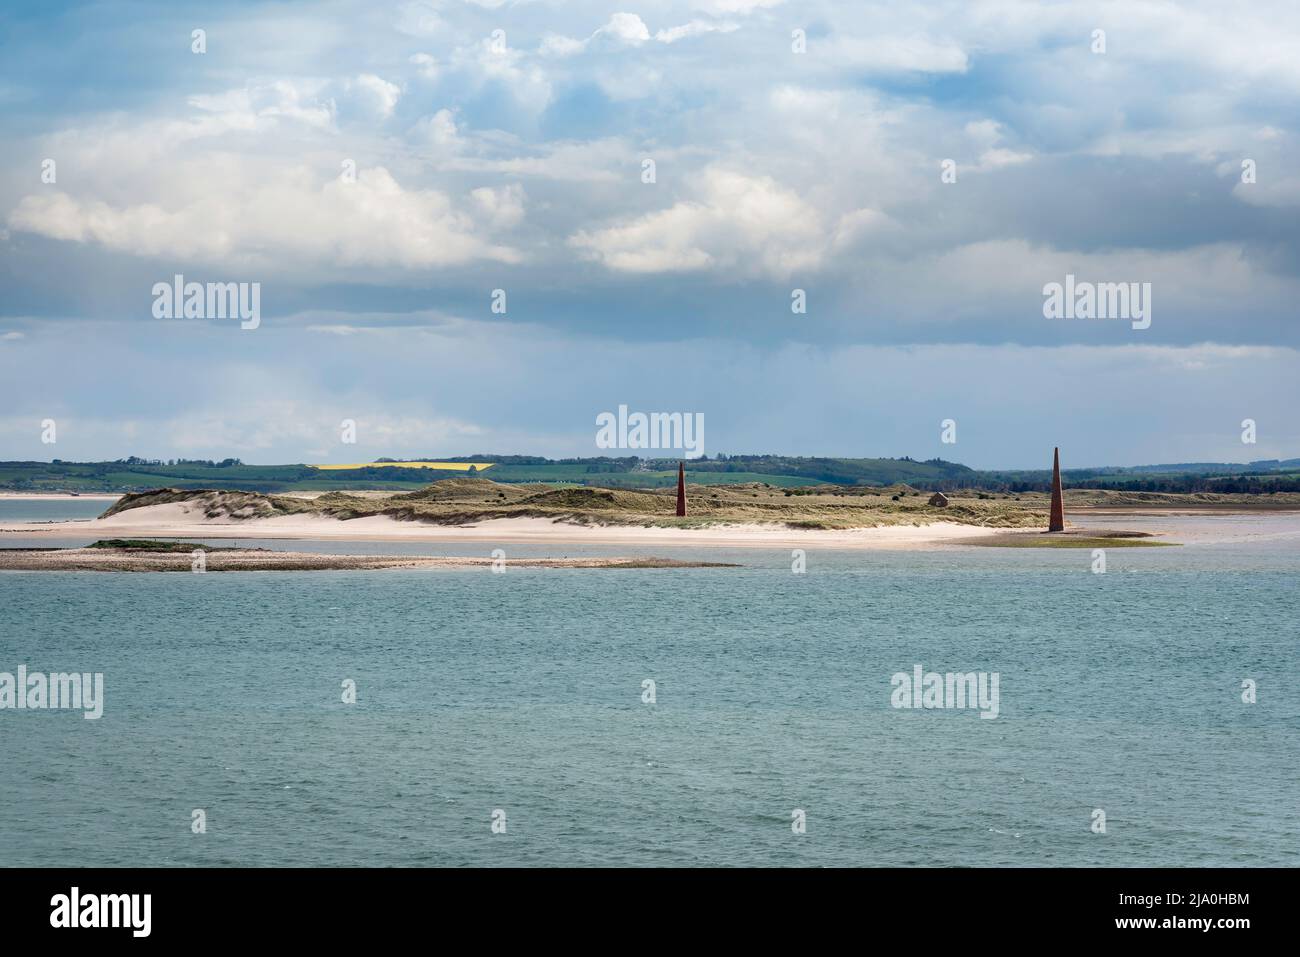 Guile Point Lighthouse, view of two stone clad obelisk towers sited on Guile Point, built to provide guidance for boats into Lindisfarne harbour, UK Stock Photo